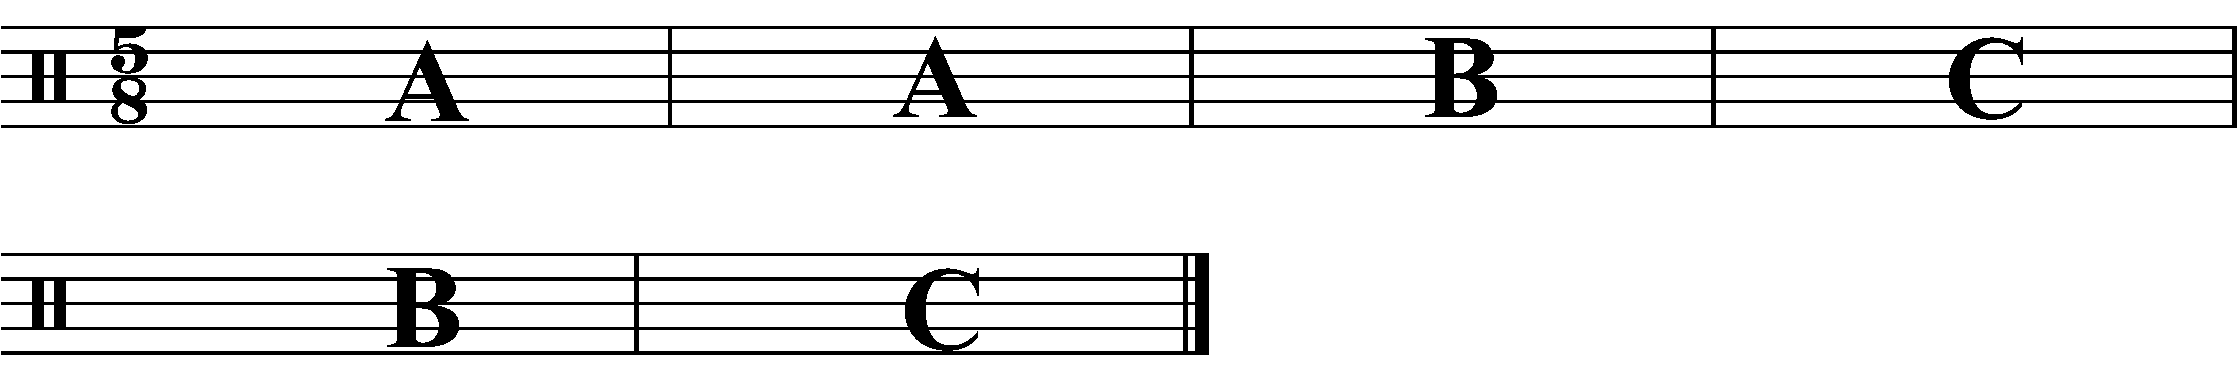 A six bar phrase using three structural sections.